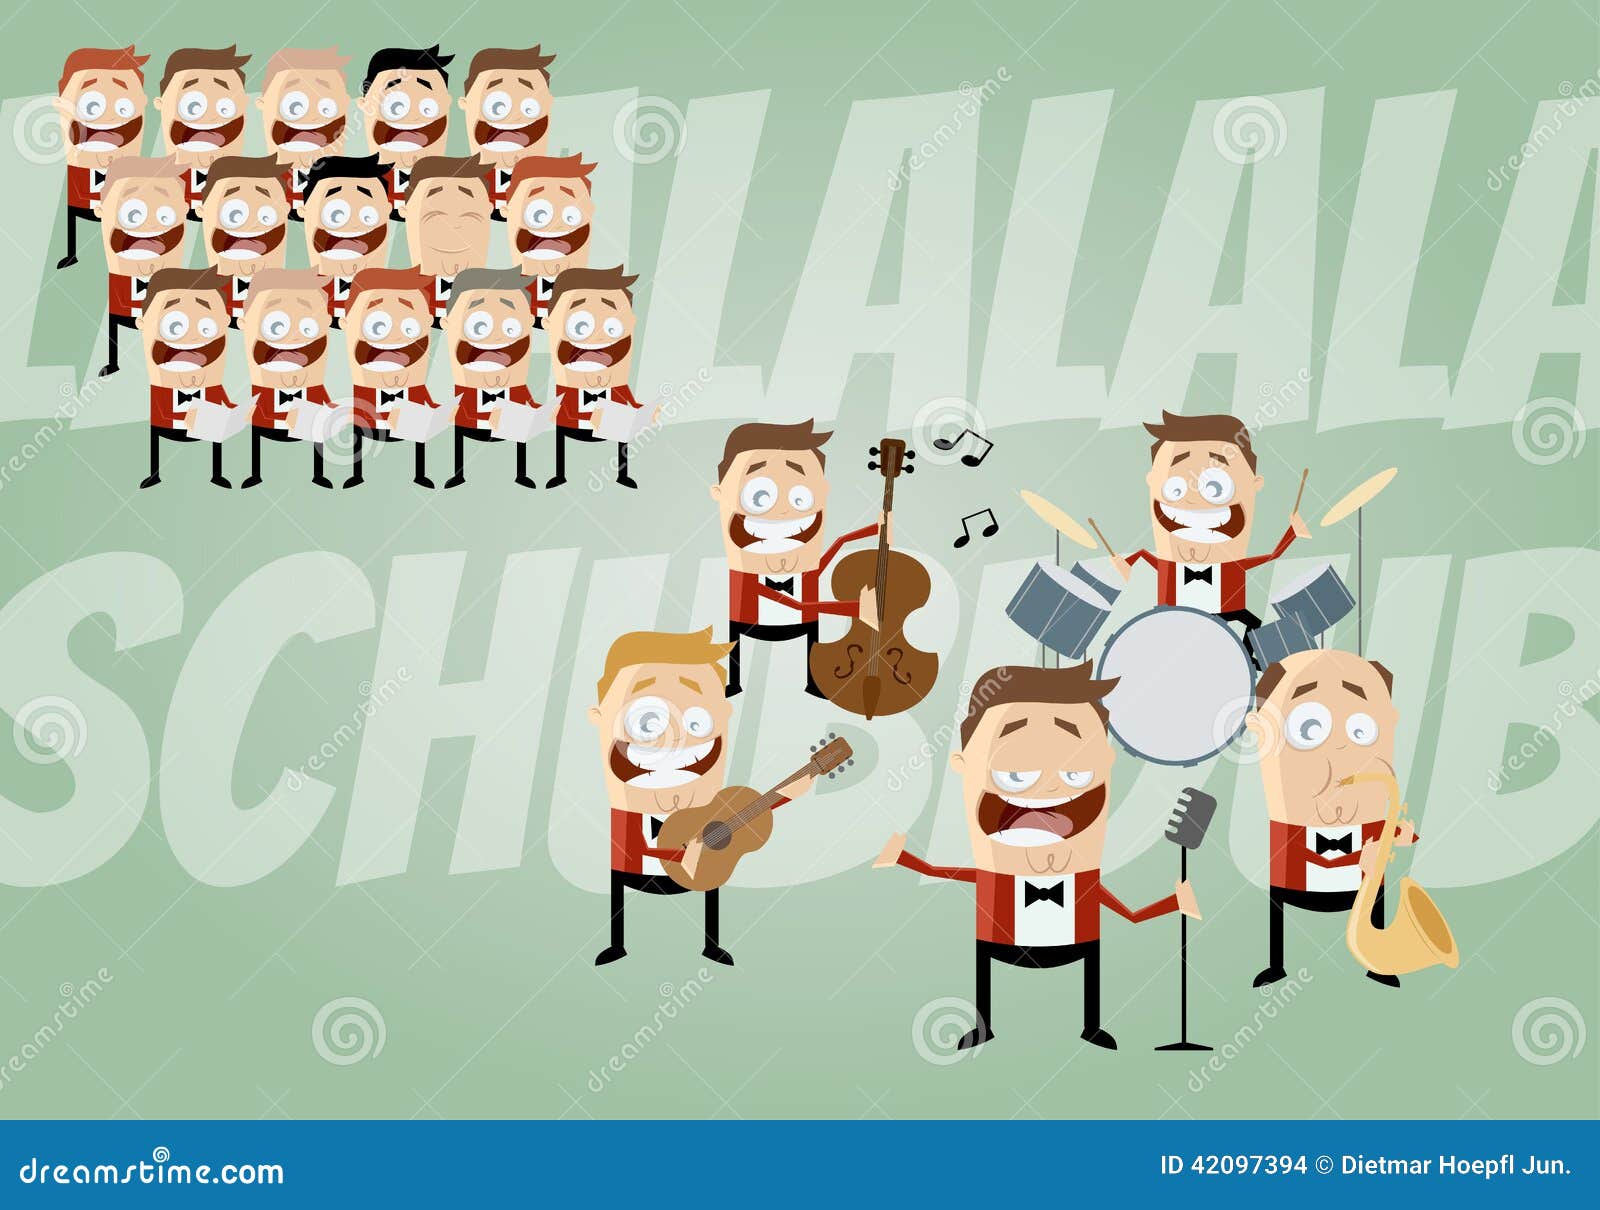 Funny Cartoon Music Band and Choir Stock Vector - Illustration of singer,  guitar: 42097394